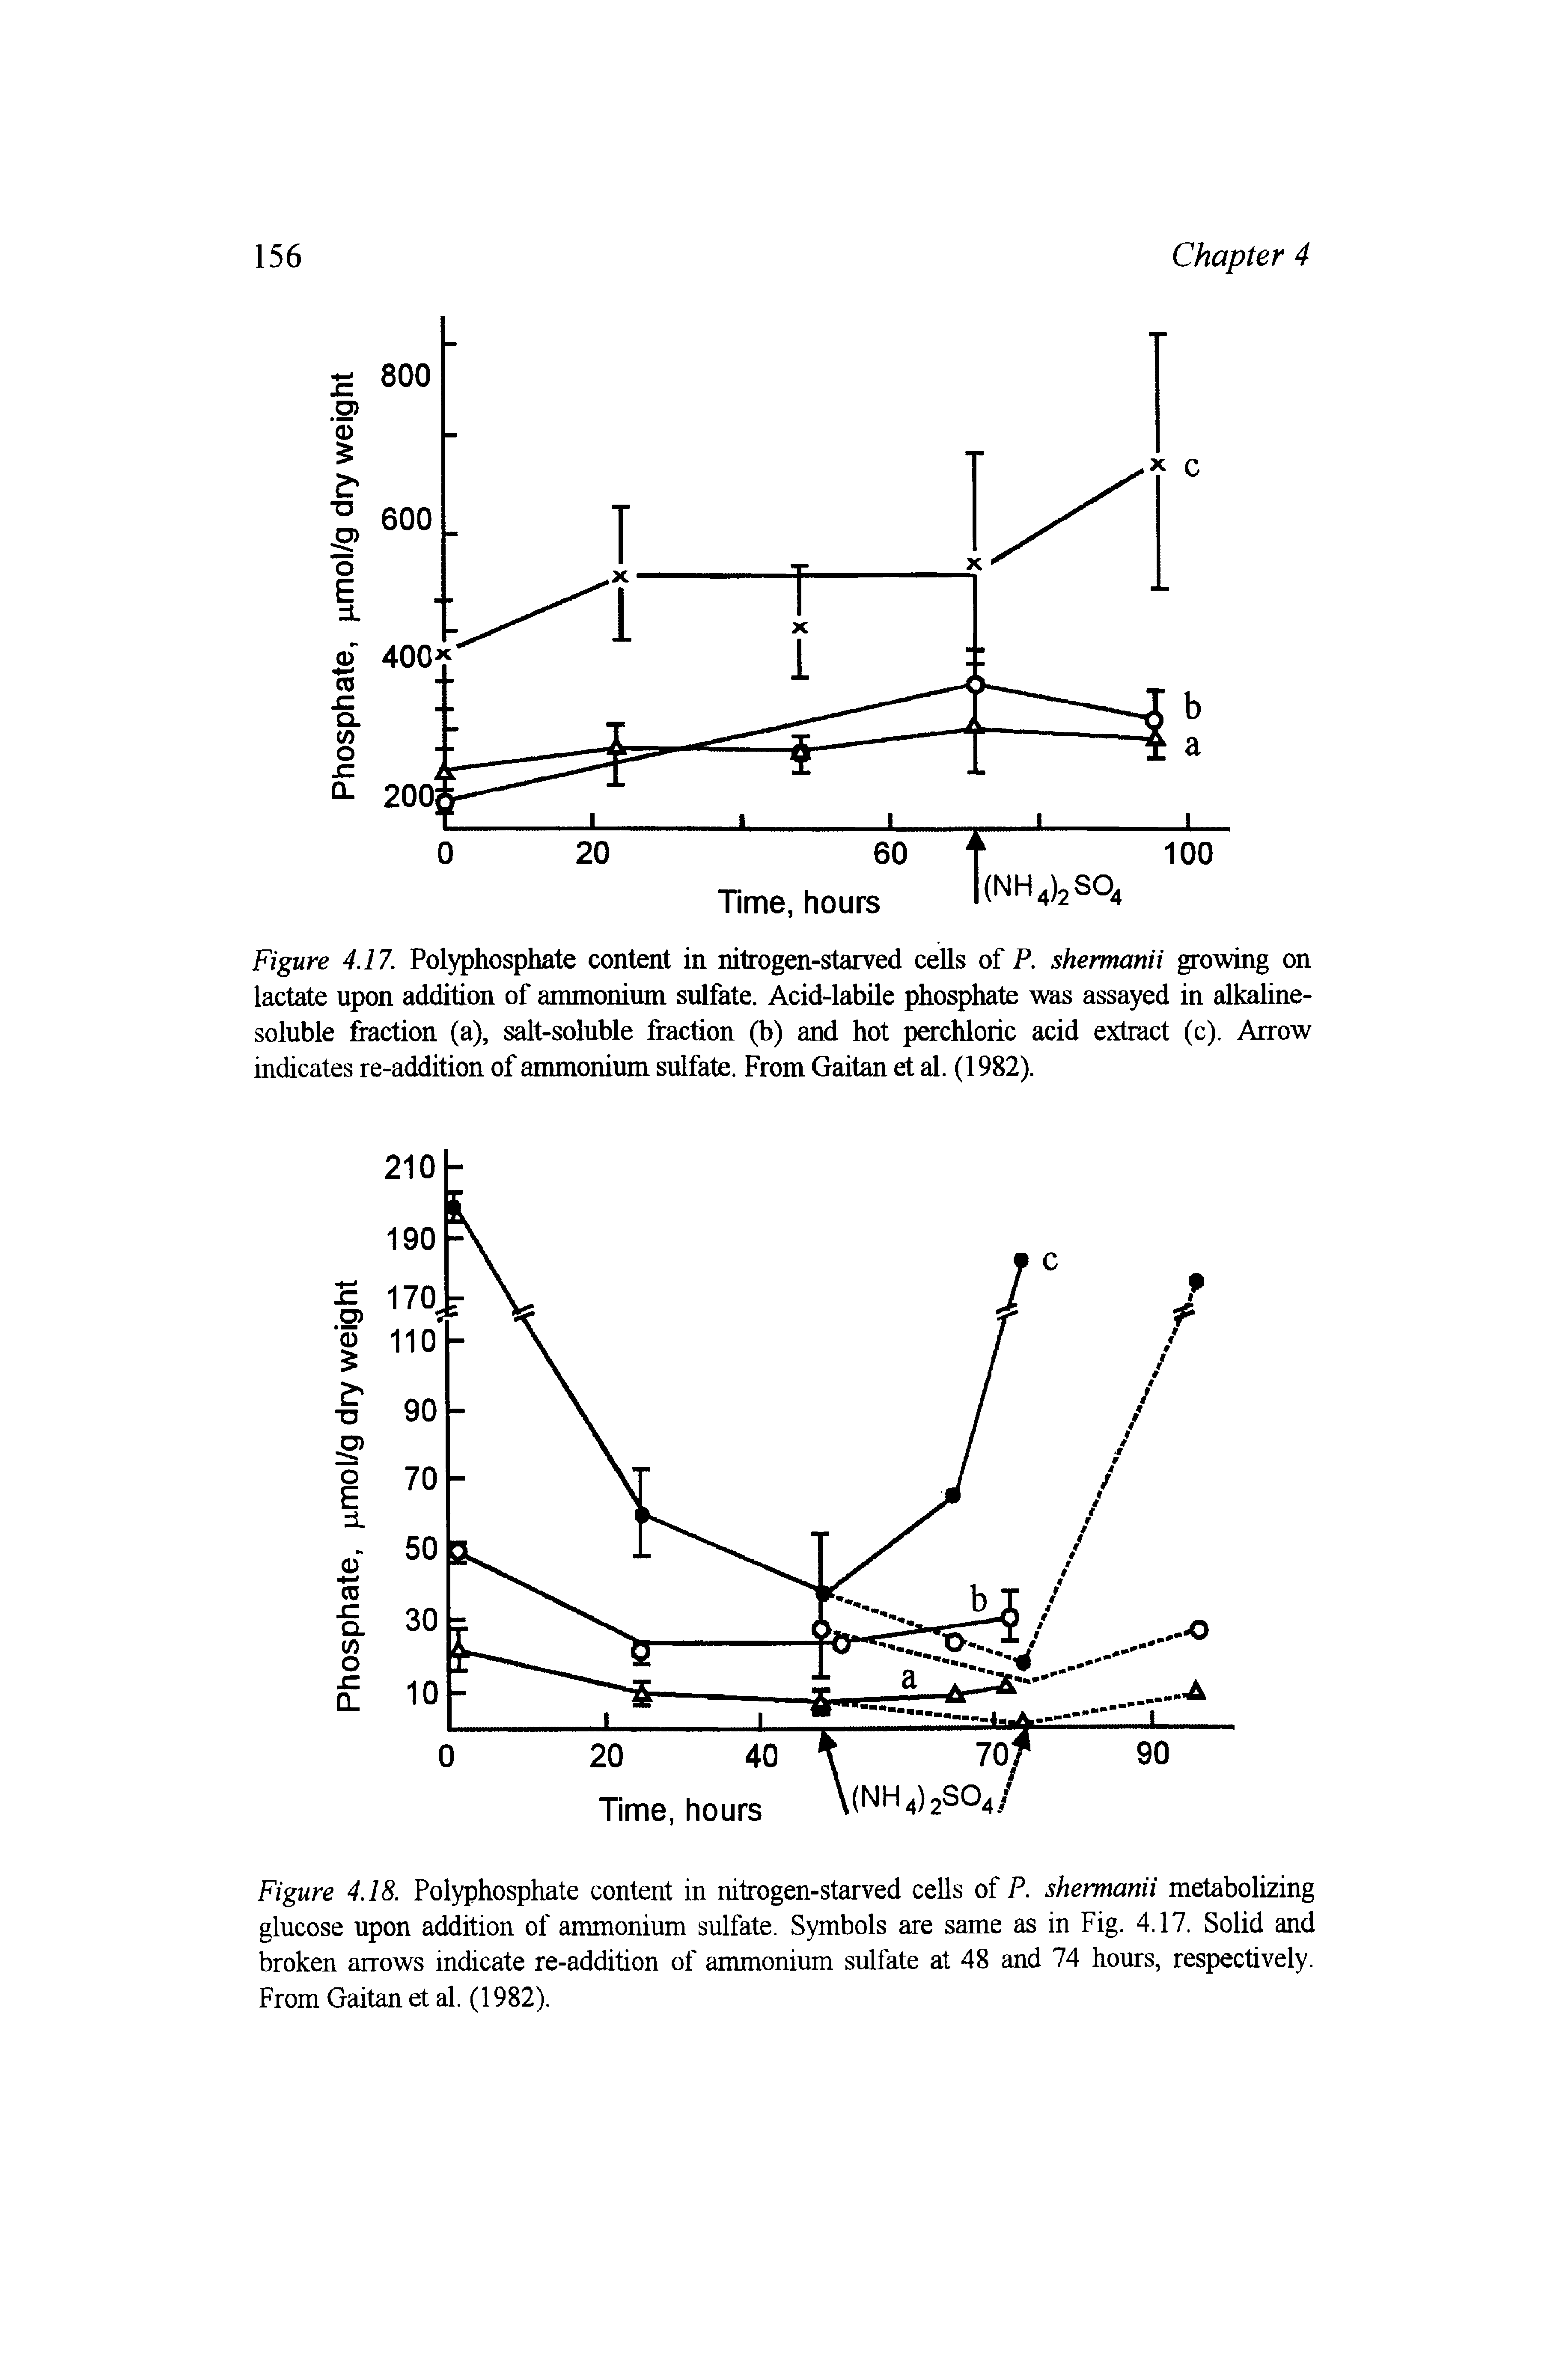 Figure 4.17. Polyphosphate content in nitrogen-starved cells of P. shermanii growing on lactate upon addition of ammonium sulfate. Acid-labile phosphate was assayed in alkaline-soluble fraction (a), salt-soluble fraction (b) and hot perchloric acid extract (c). Arrow indicates re-addition of ammonium sulfate. From Gaitan et al. (1982).